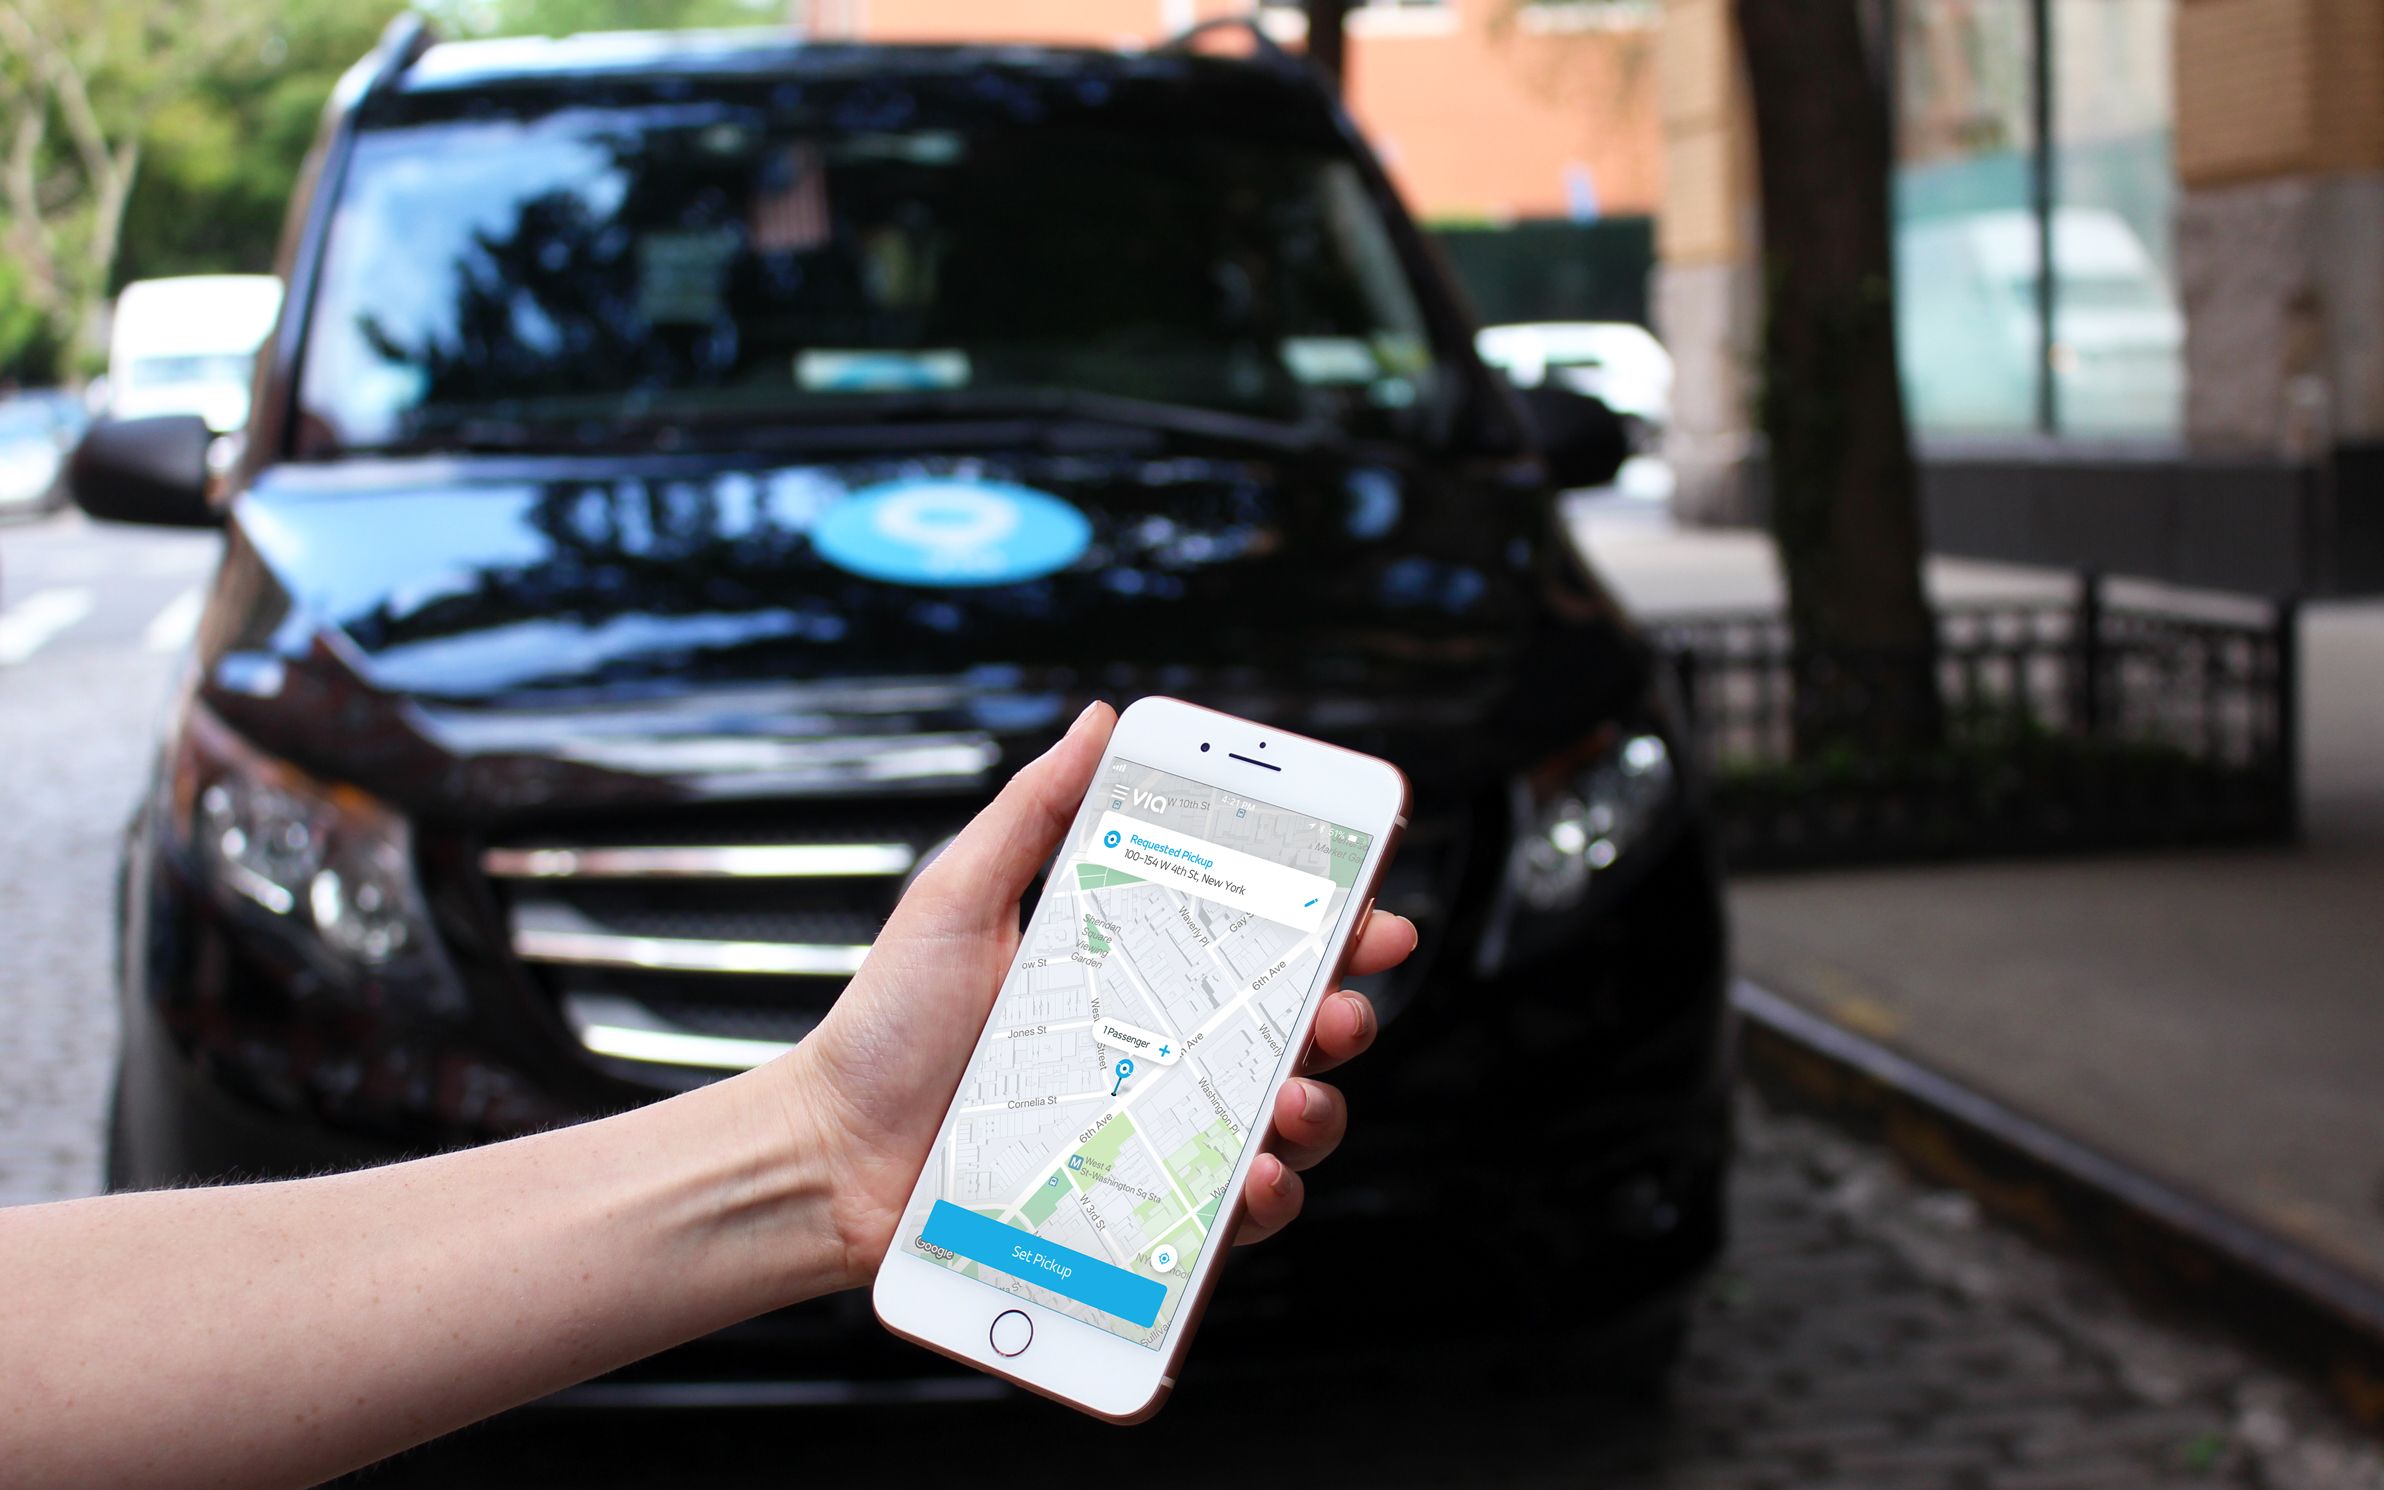 Via and Uber join forces to provide cost-efficient transportation…